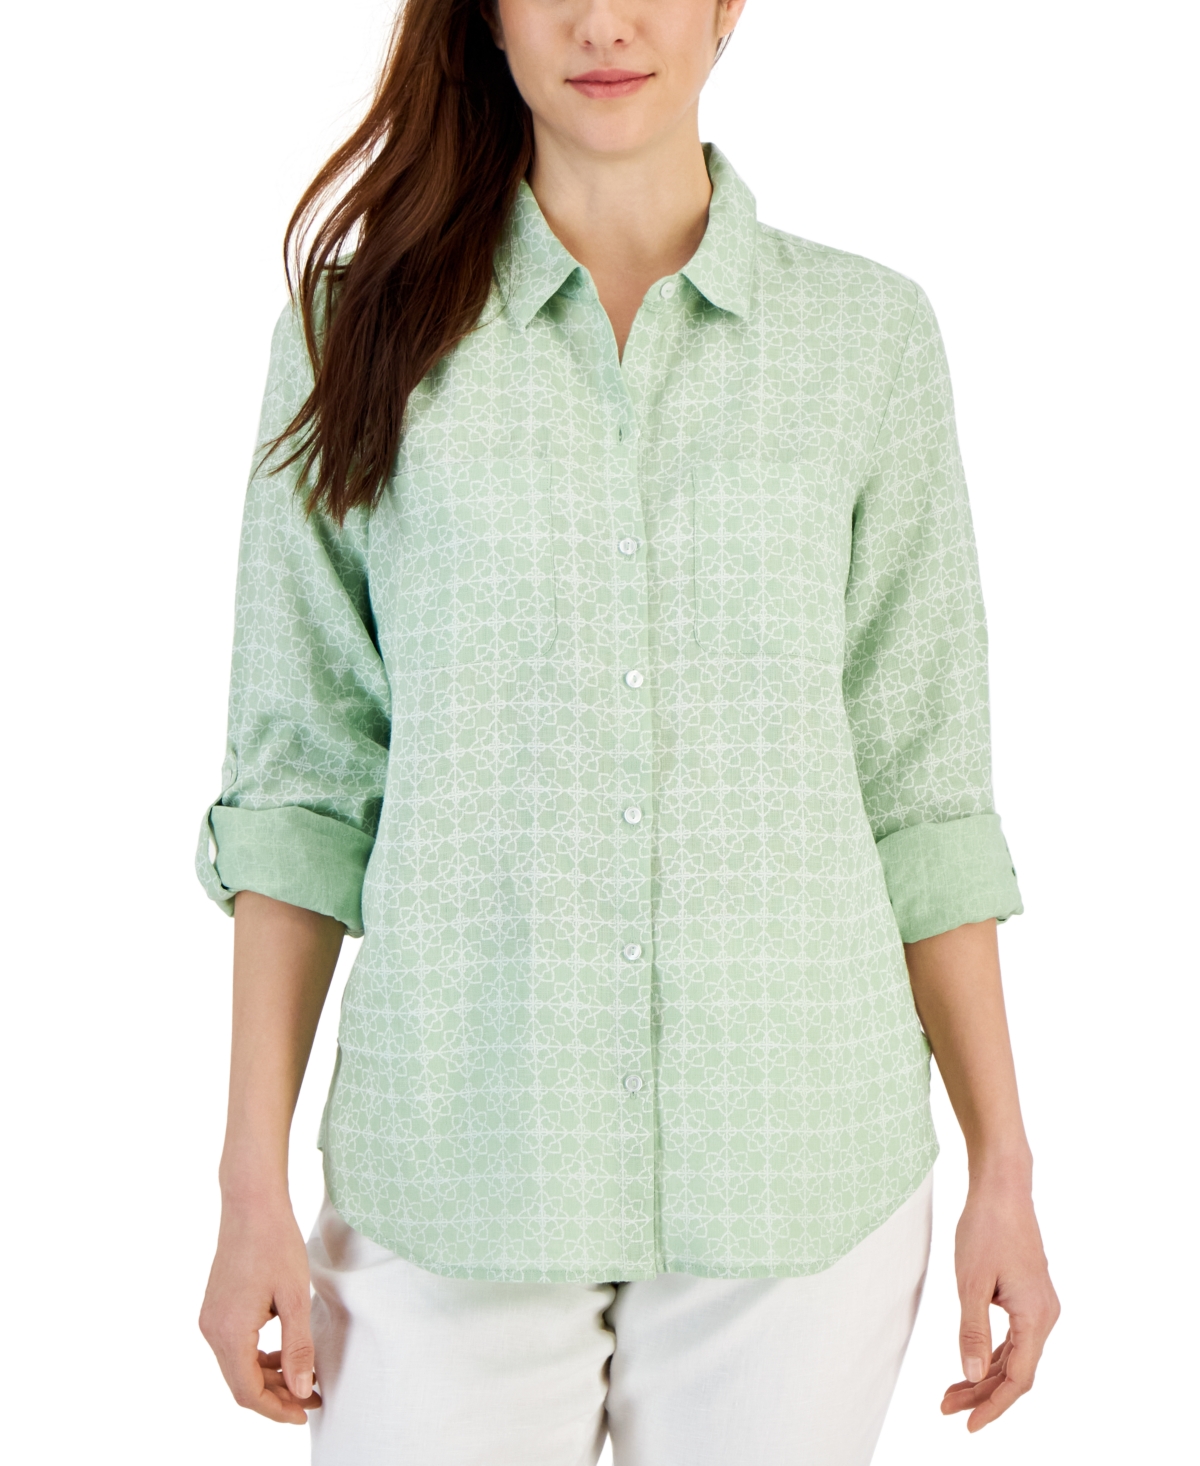 Women's 100% Linen Geo-Print Roll-Tab Shirt, Created for Macy's - Green Frost Combo